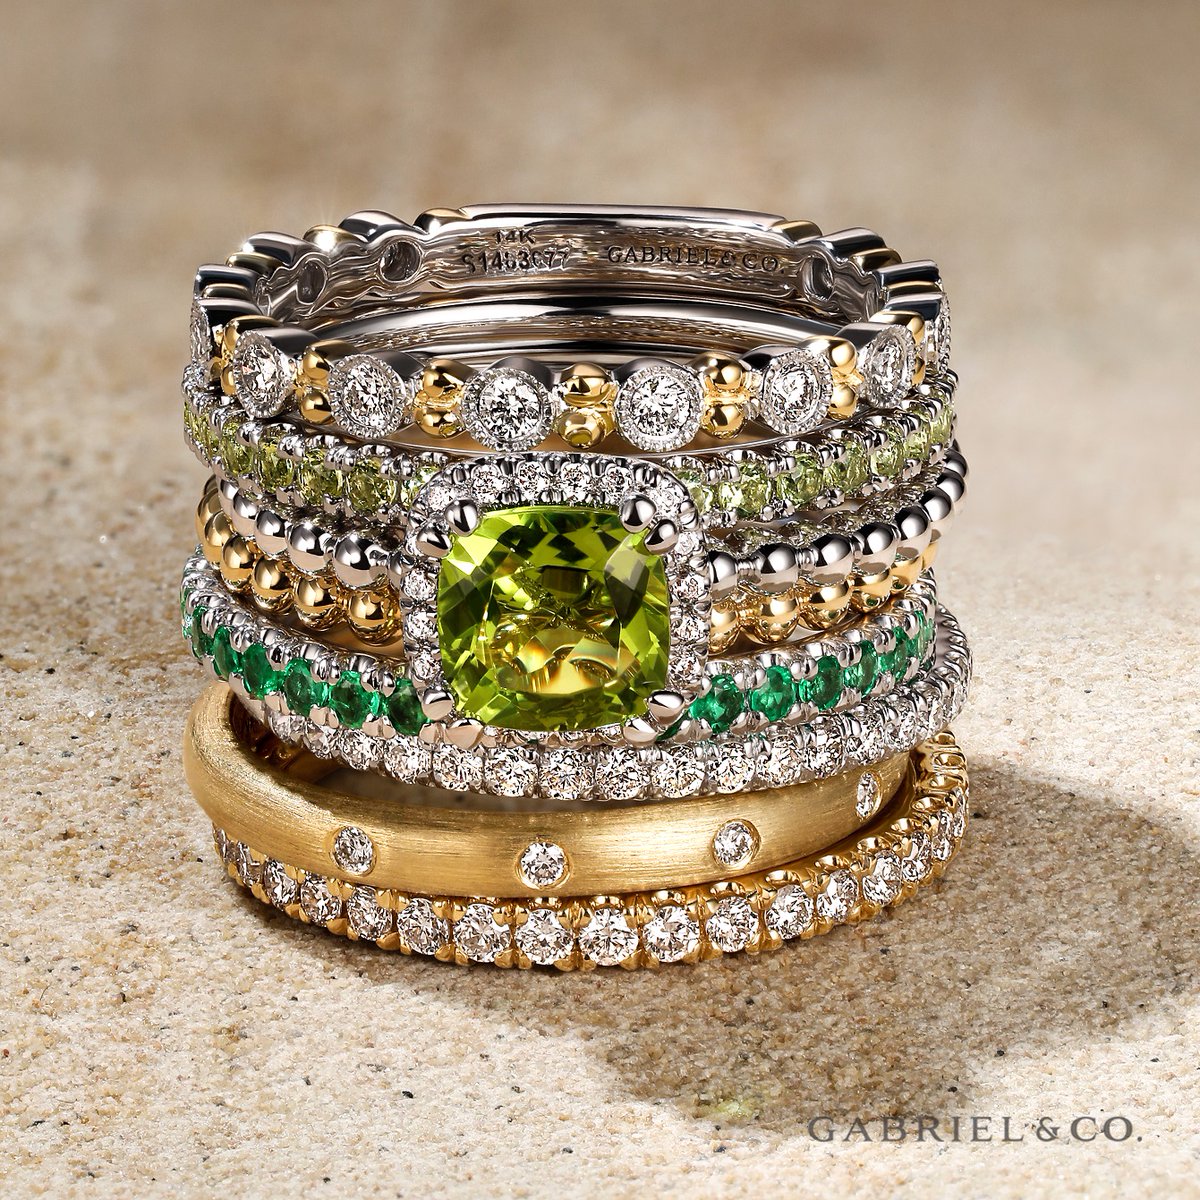 Mix, match, and stack your way to a unique and dazzling look with our stunning collection of stackable rings. From diamonds to emeralds and peridots, we've got something for everyone. 💖 bit.ly/3MDIOif. #GabrielandCo #fashionrings #stackablerings #stackablebands